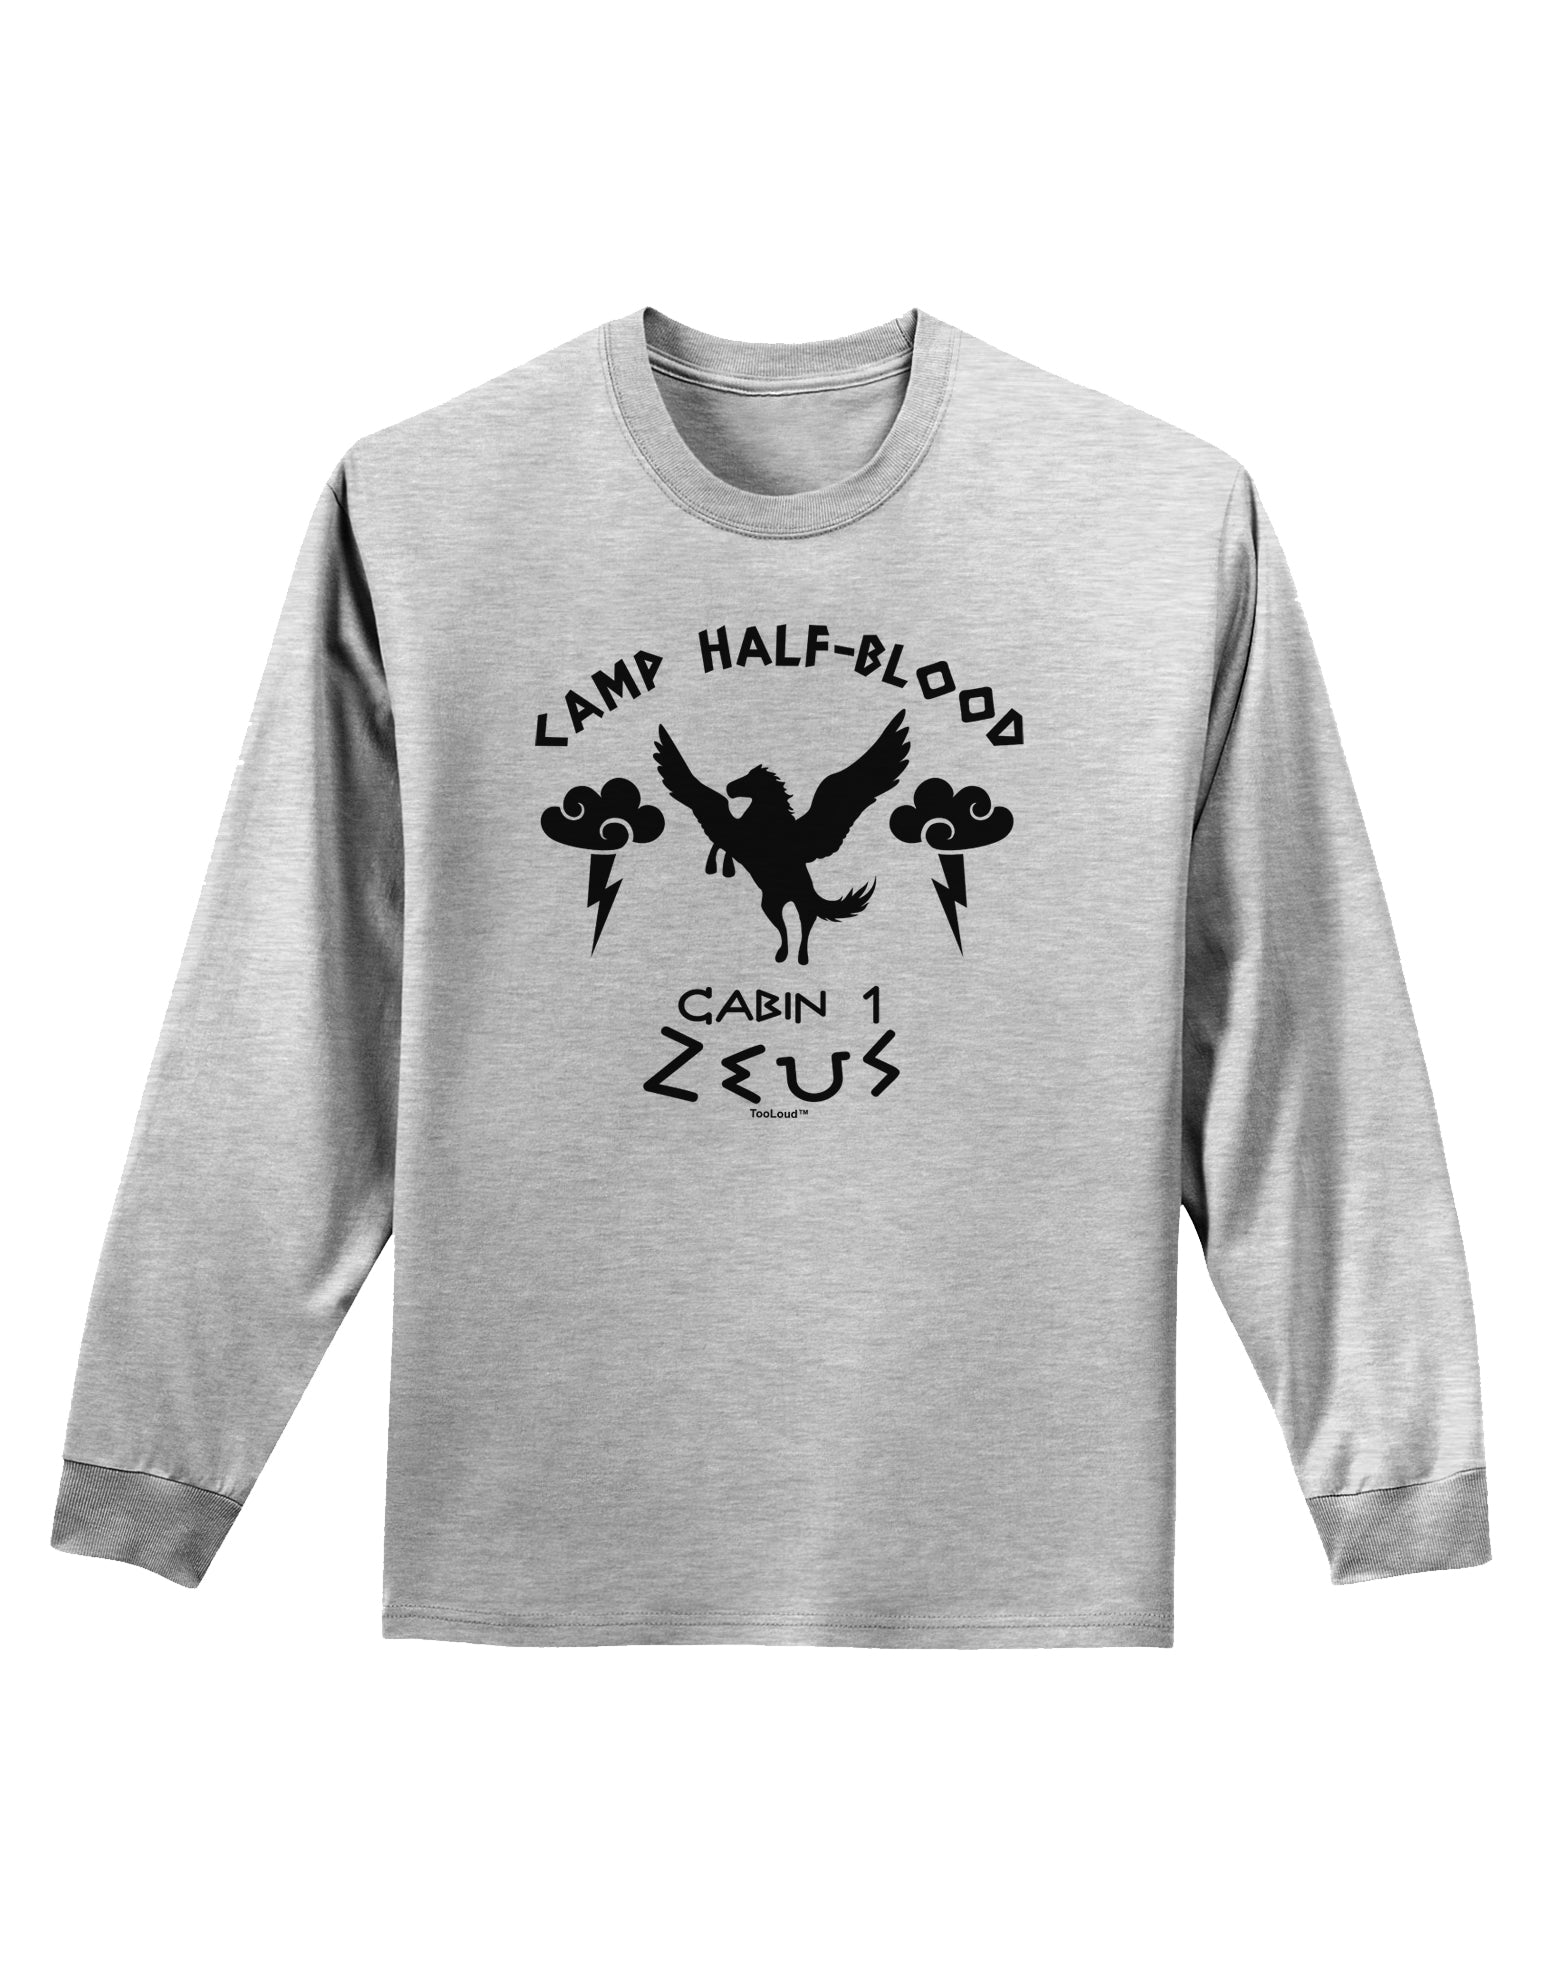 Zeus Adult T-Shirt from Camp Half Blood Cabin 1 - A Must-Have for Fans of  TooLoud